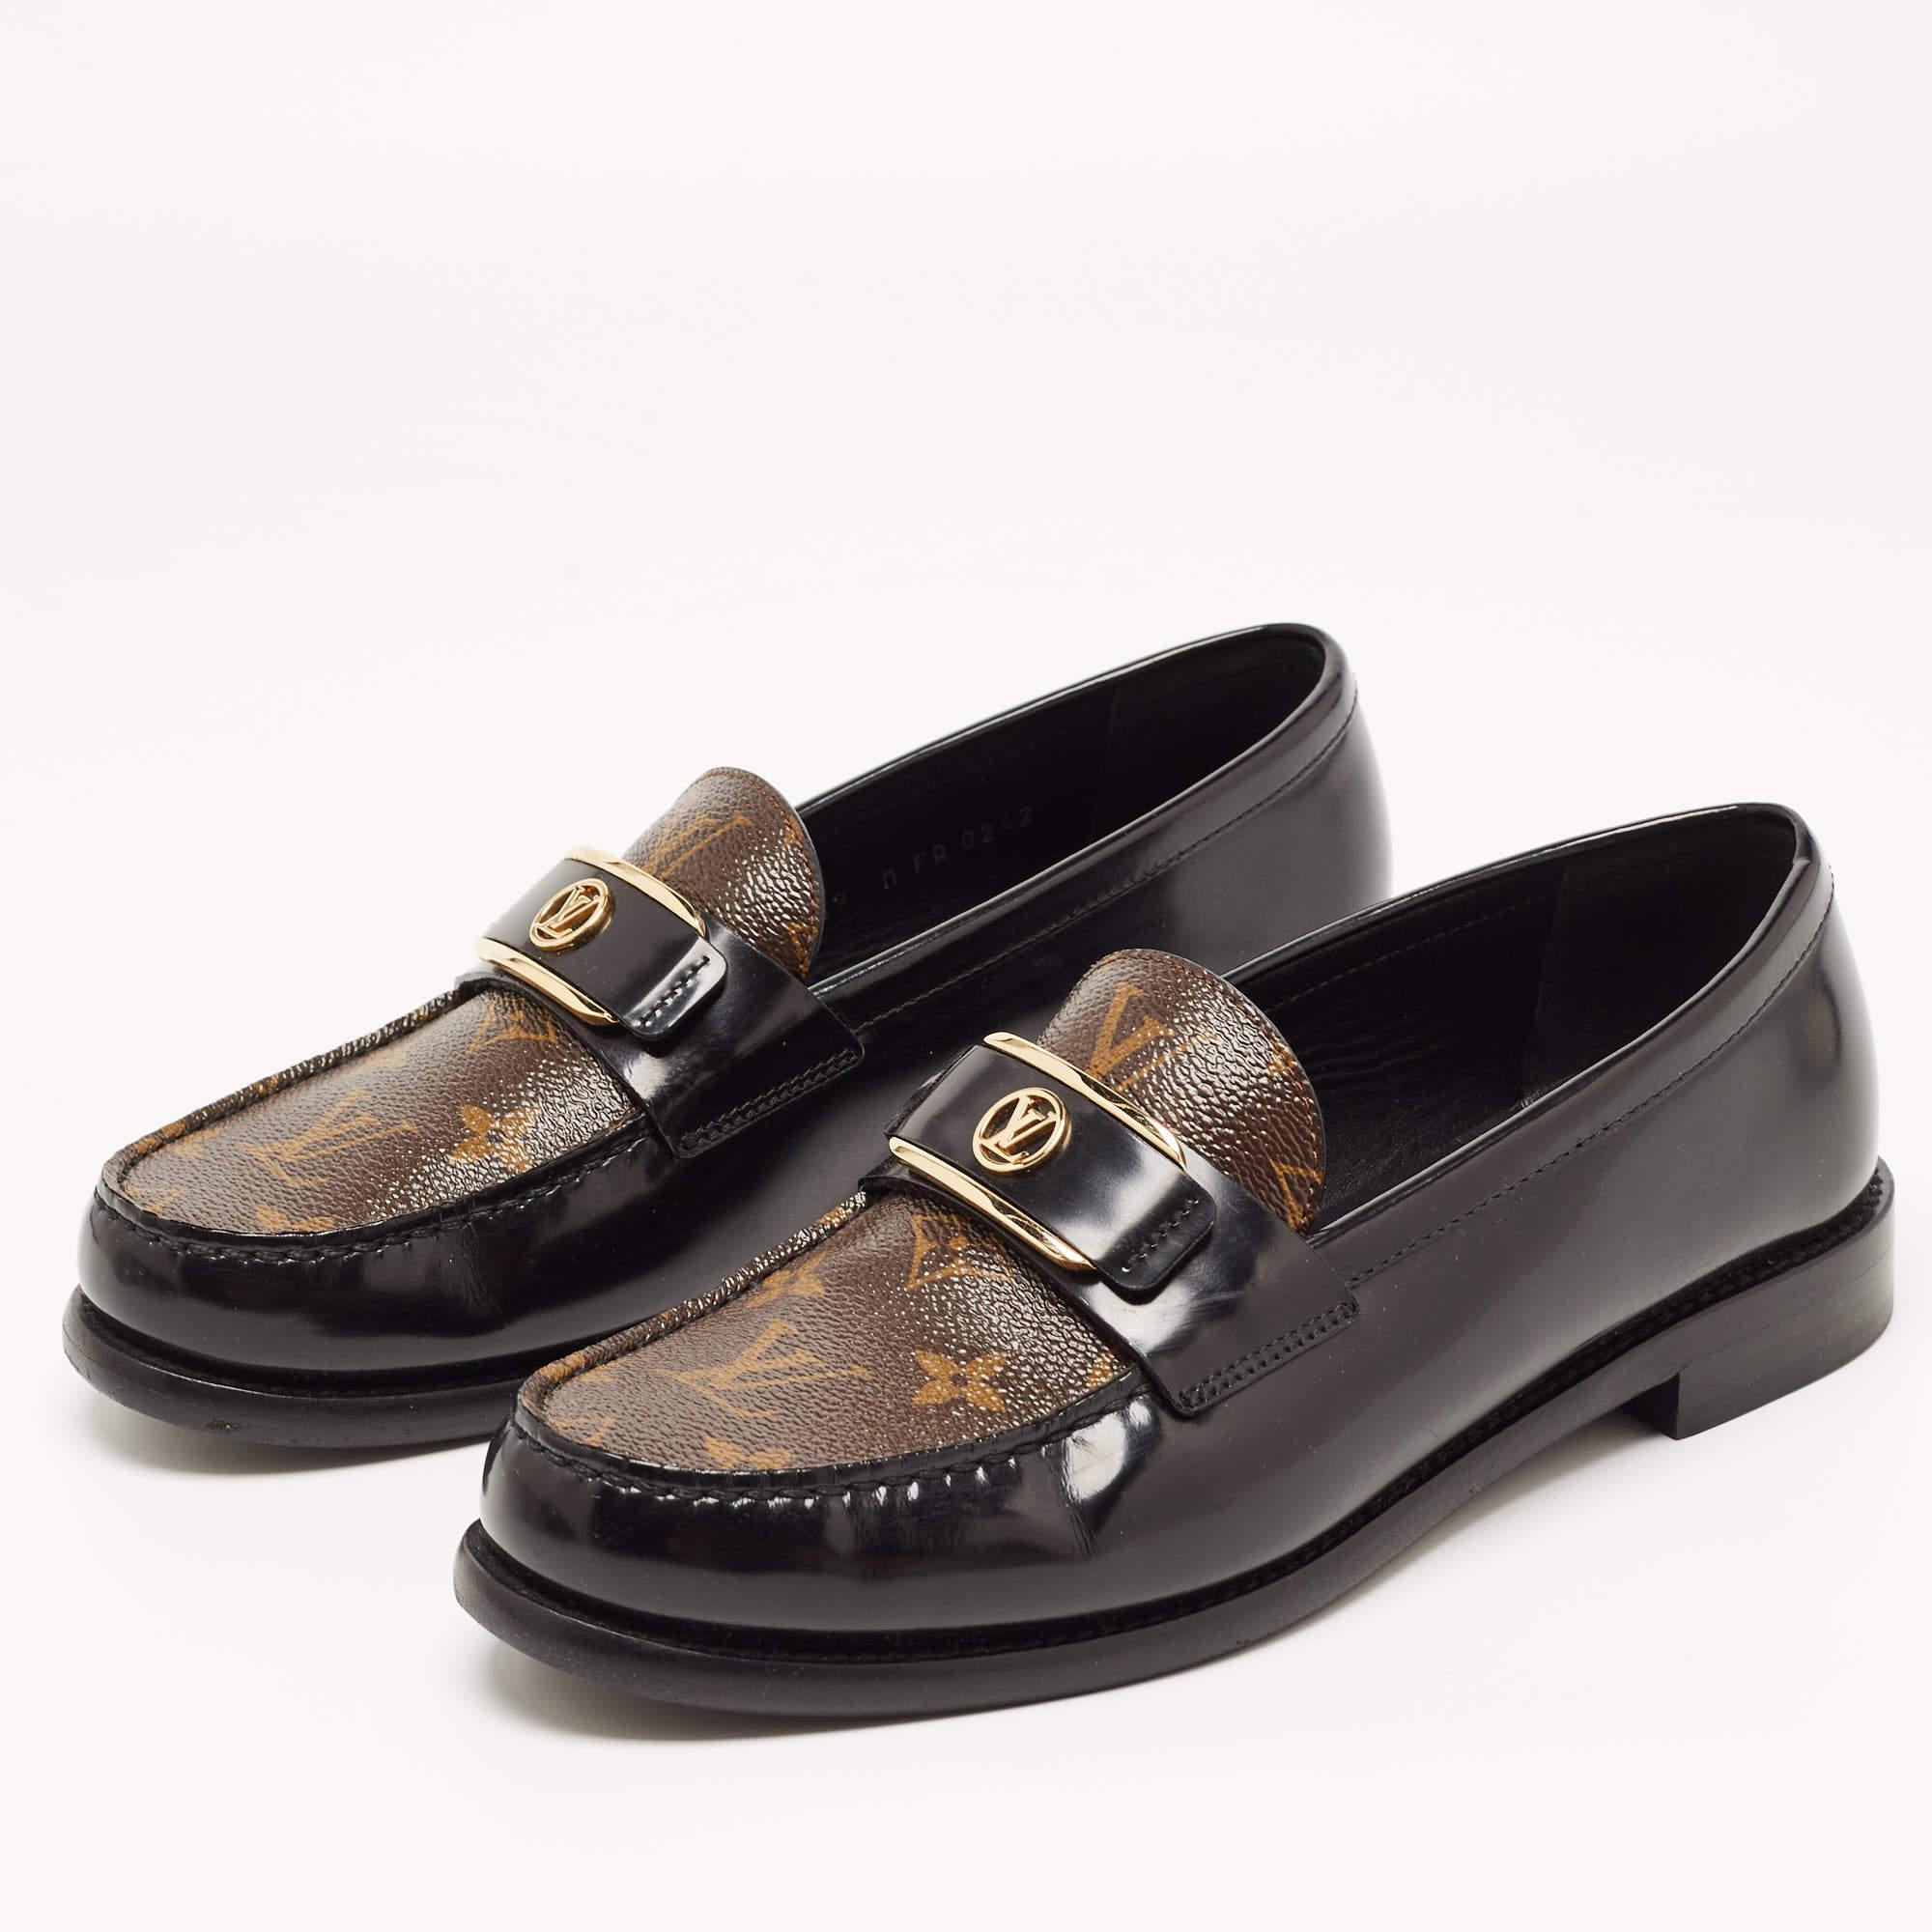 Louis Vuitton Black Monogram Canvas and Leather Academy Loafers Size 39 1